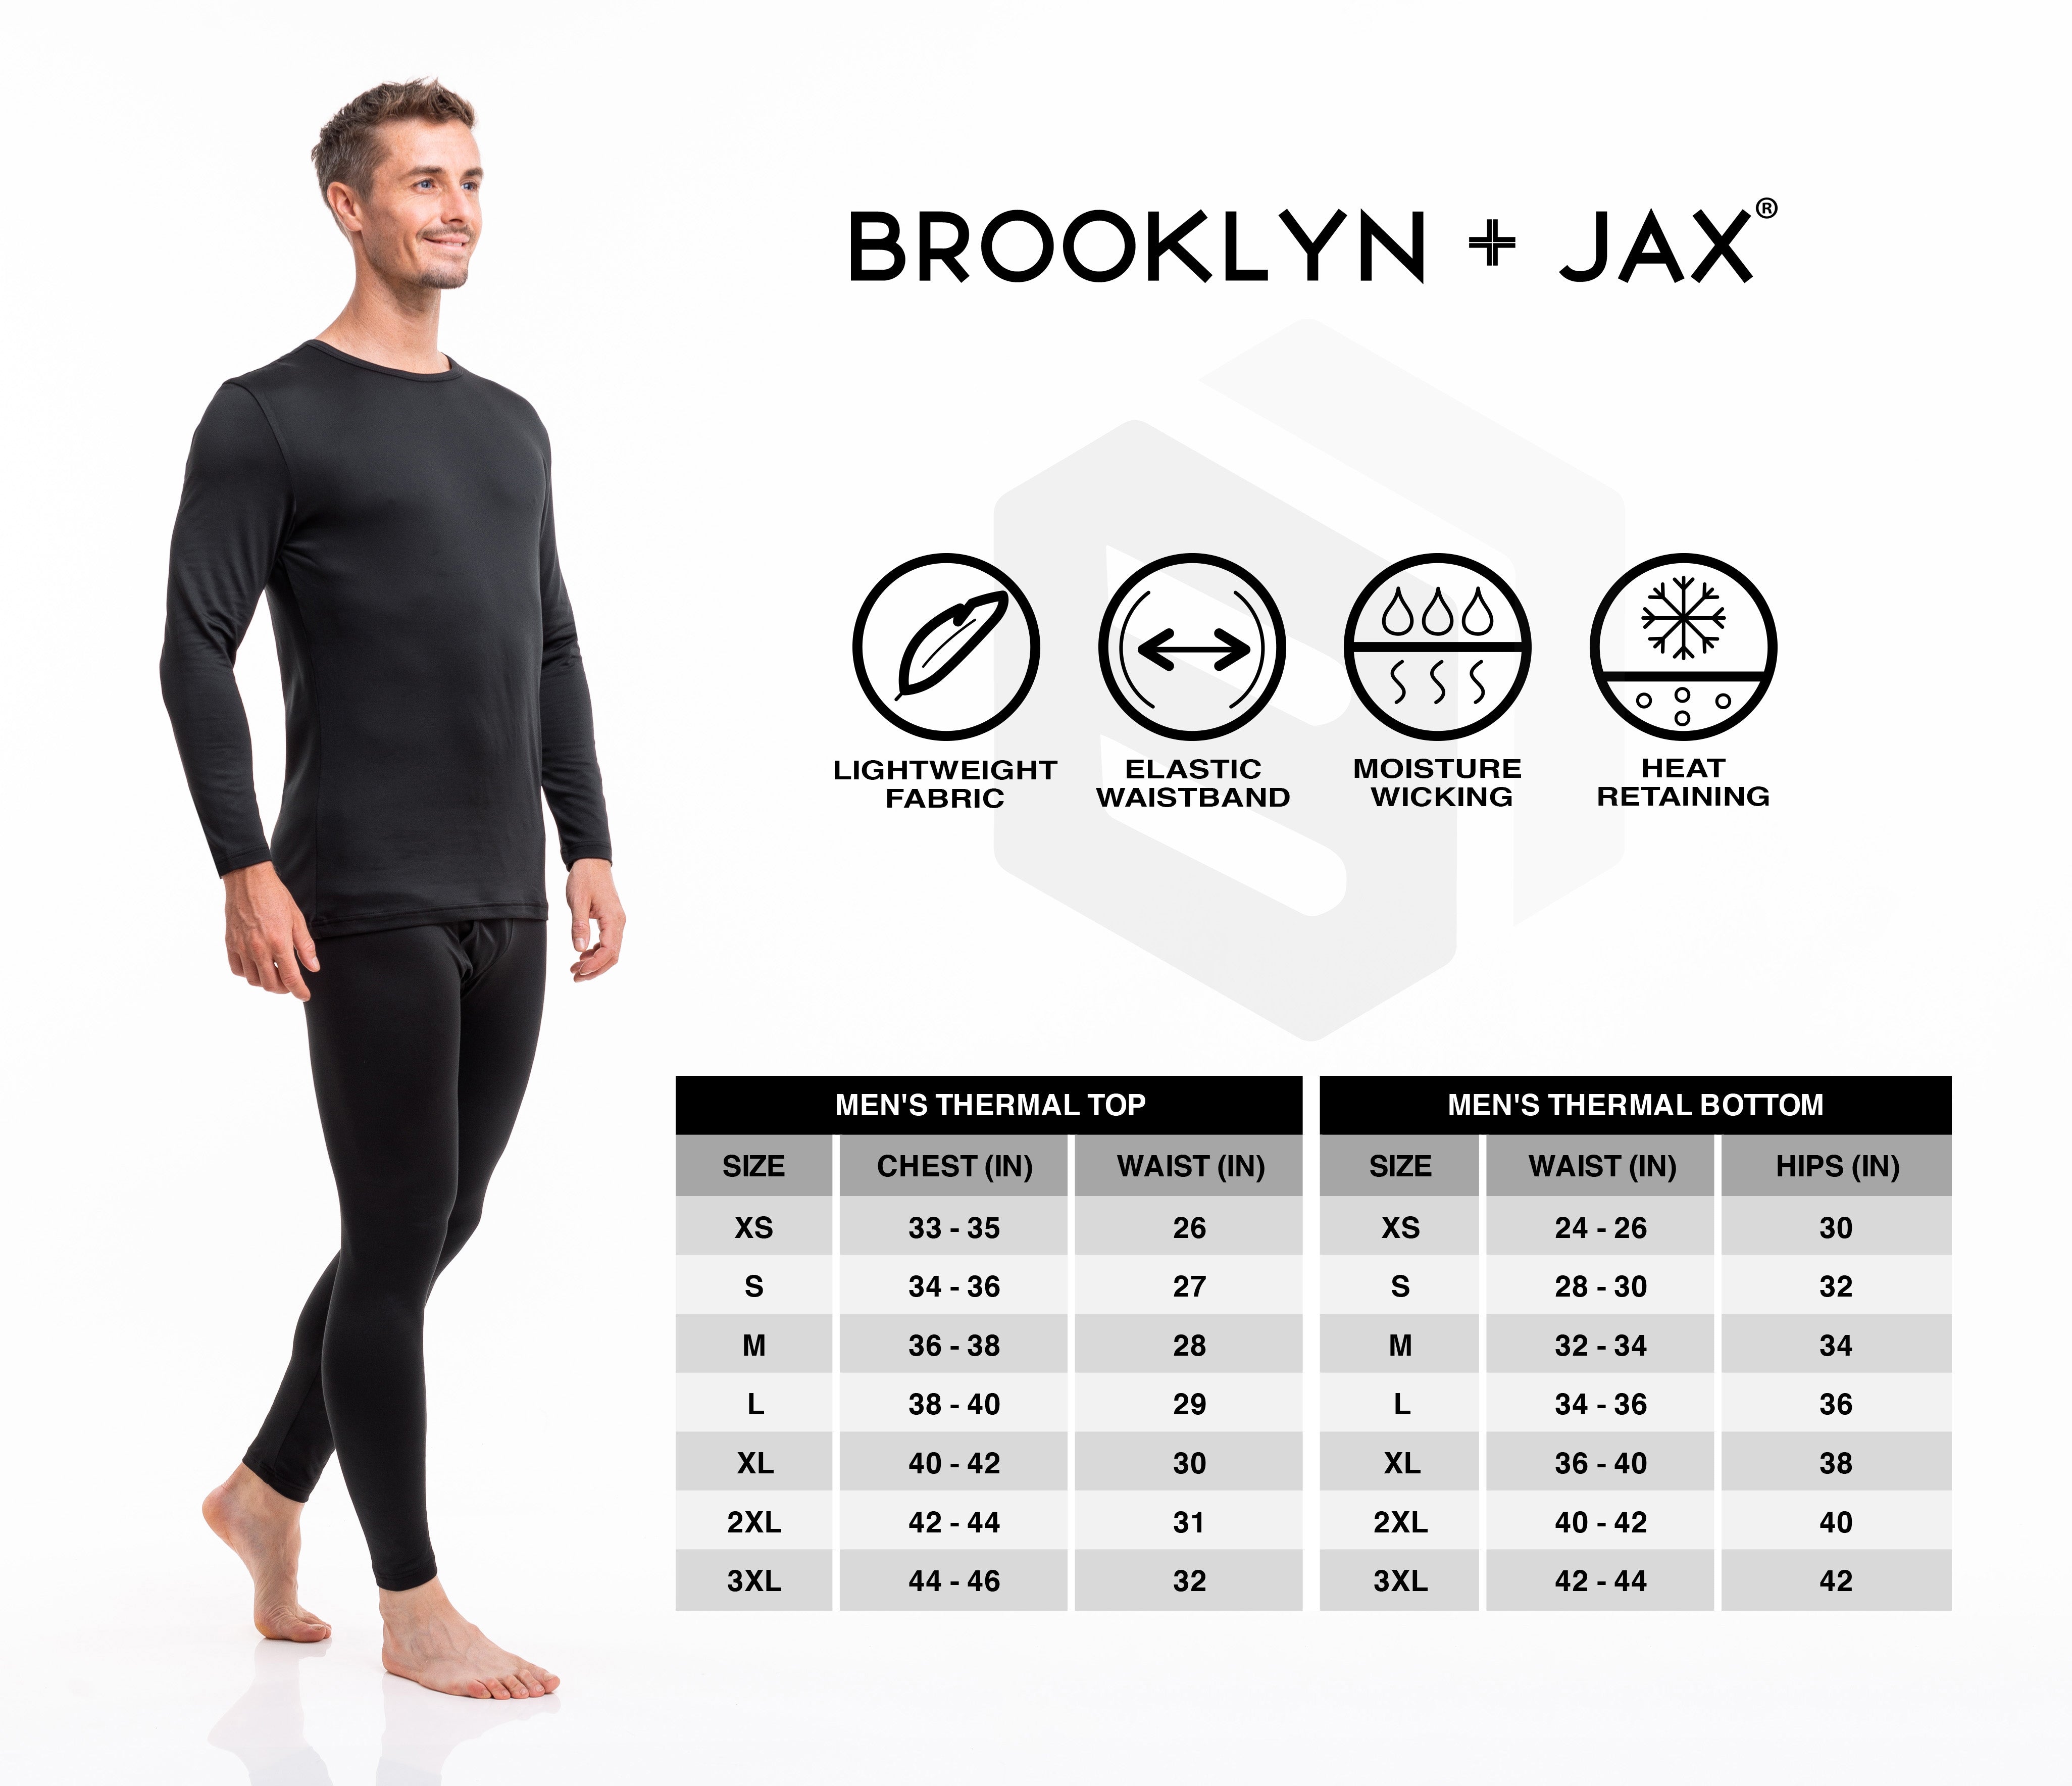 Men's Oh So Soft Luxe Layering Thermal Underwear Leggings